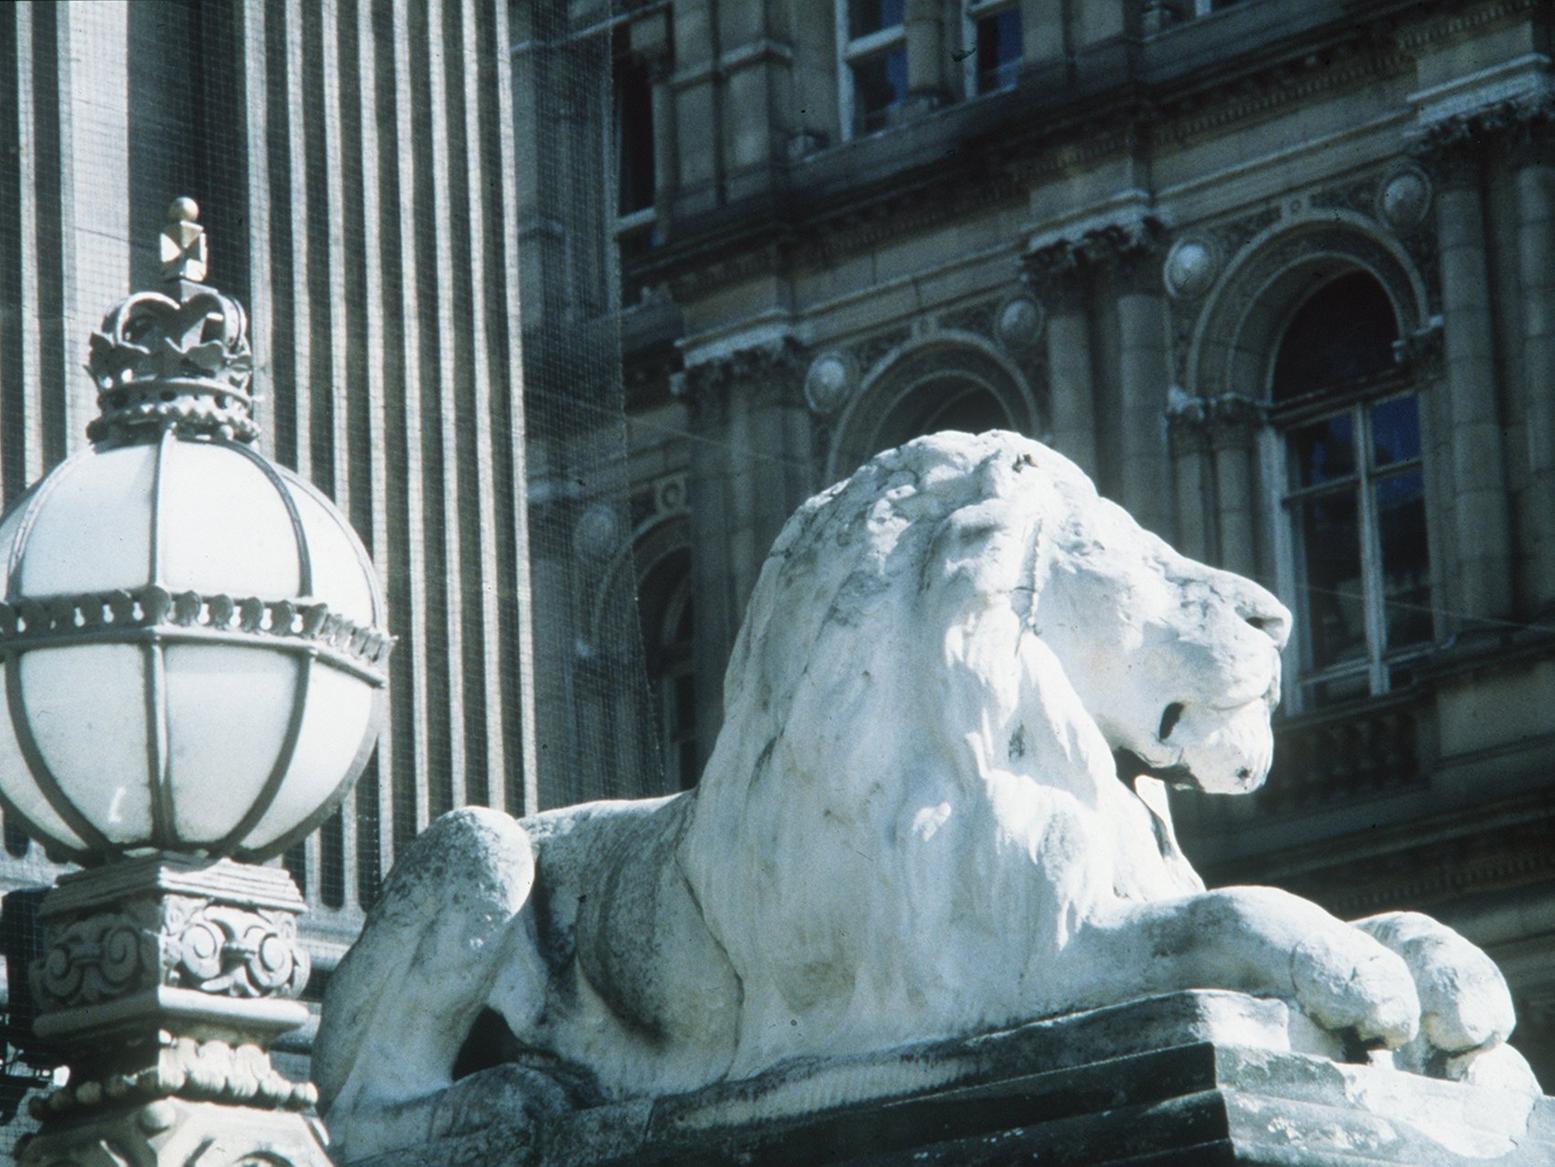 The lions outside Leeds Town Hall are the subject of another tale with different versions. One version is that if the bell ever struck 13, the lions would come to life and go on a killing spree around the city.